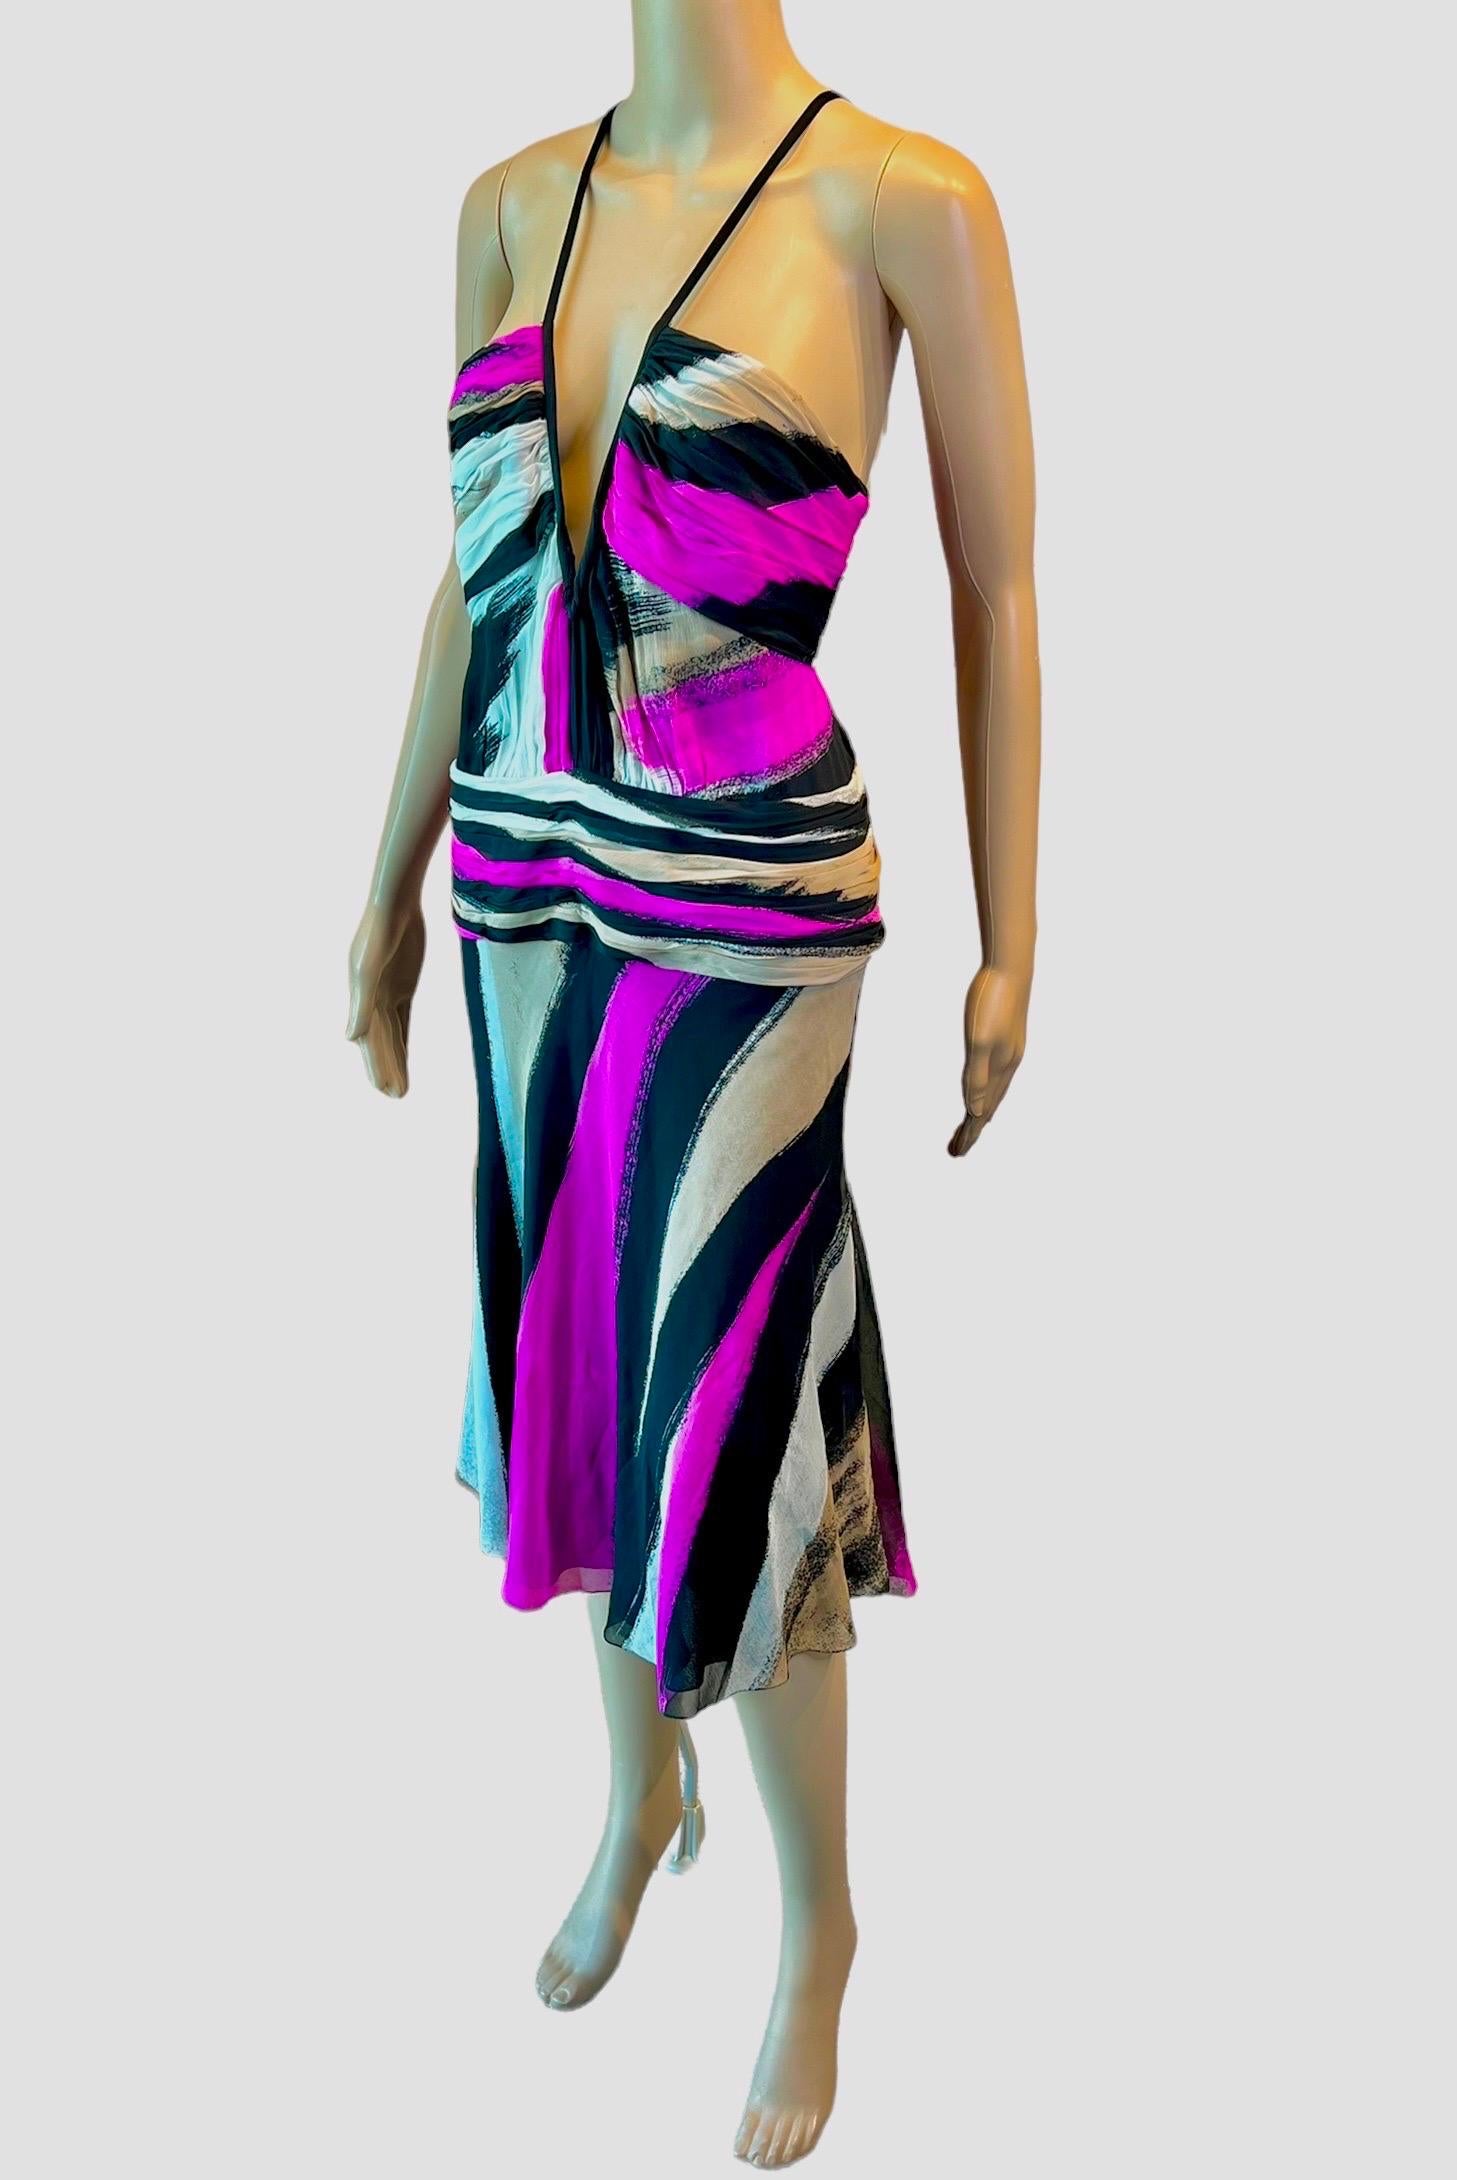 Gianni Versace F/W 2001 Runway Plunging Neckline Geometric Abstract Print Dress For Sale 2